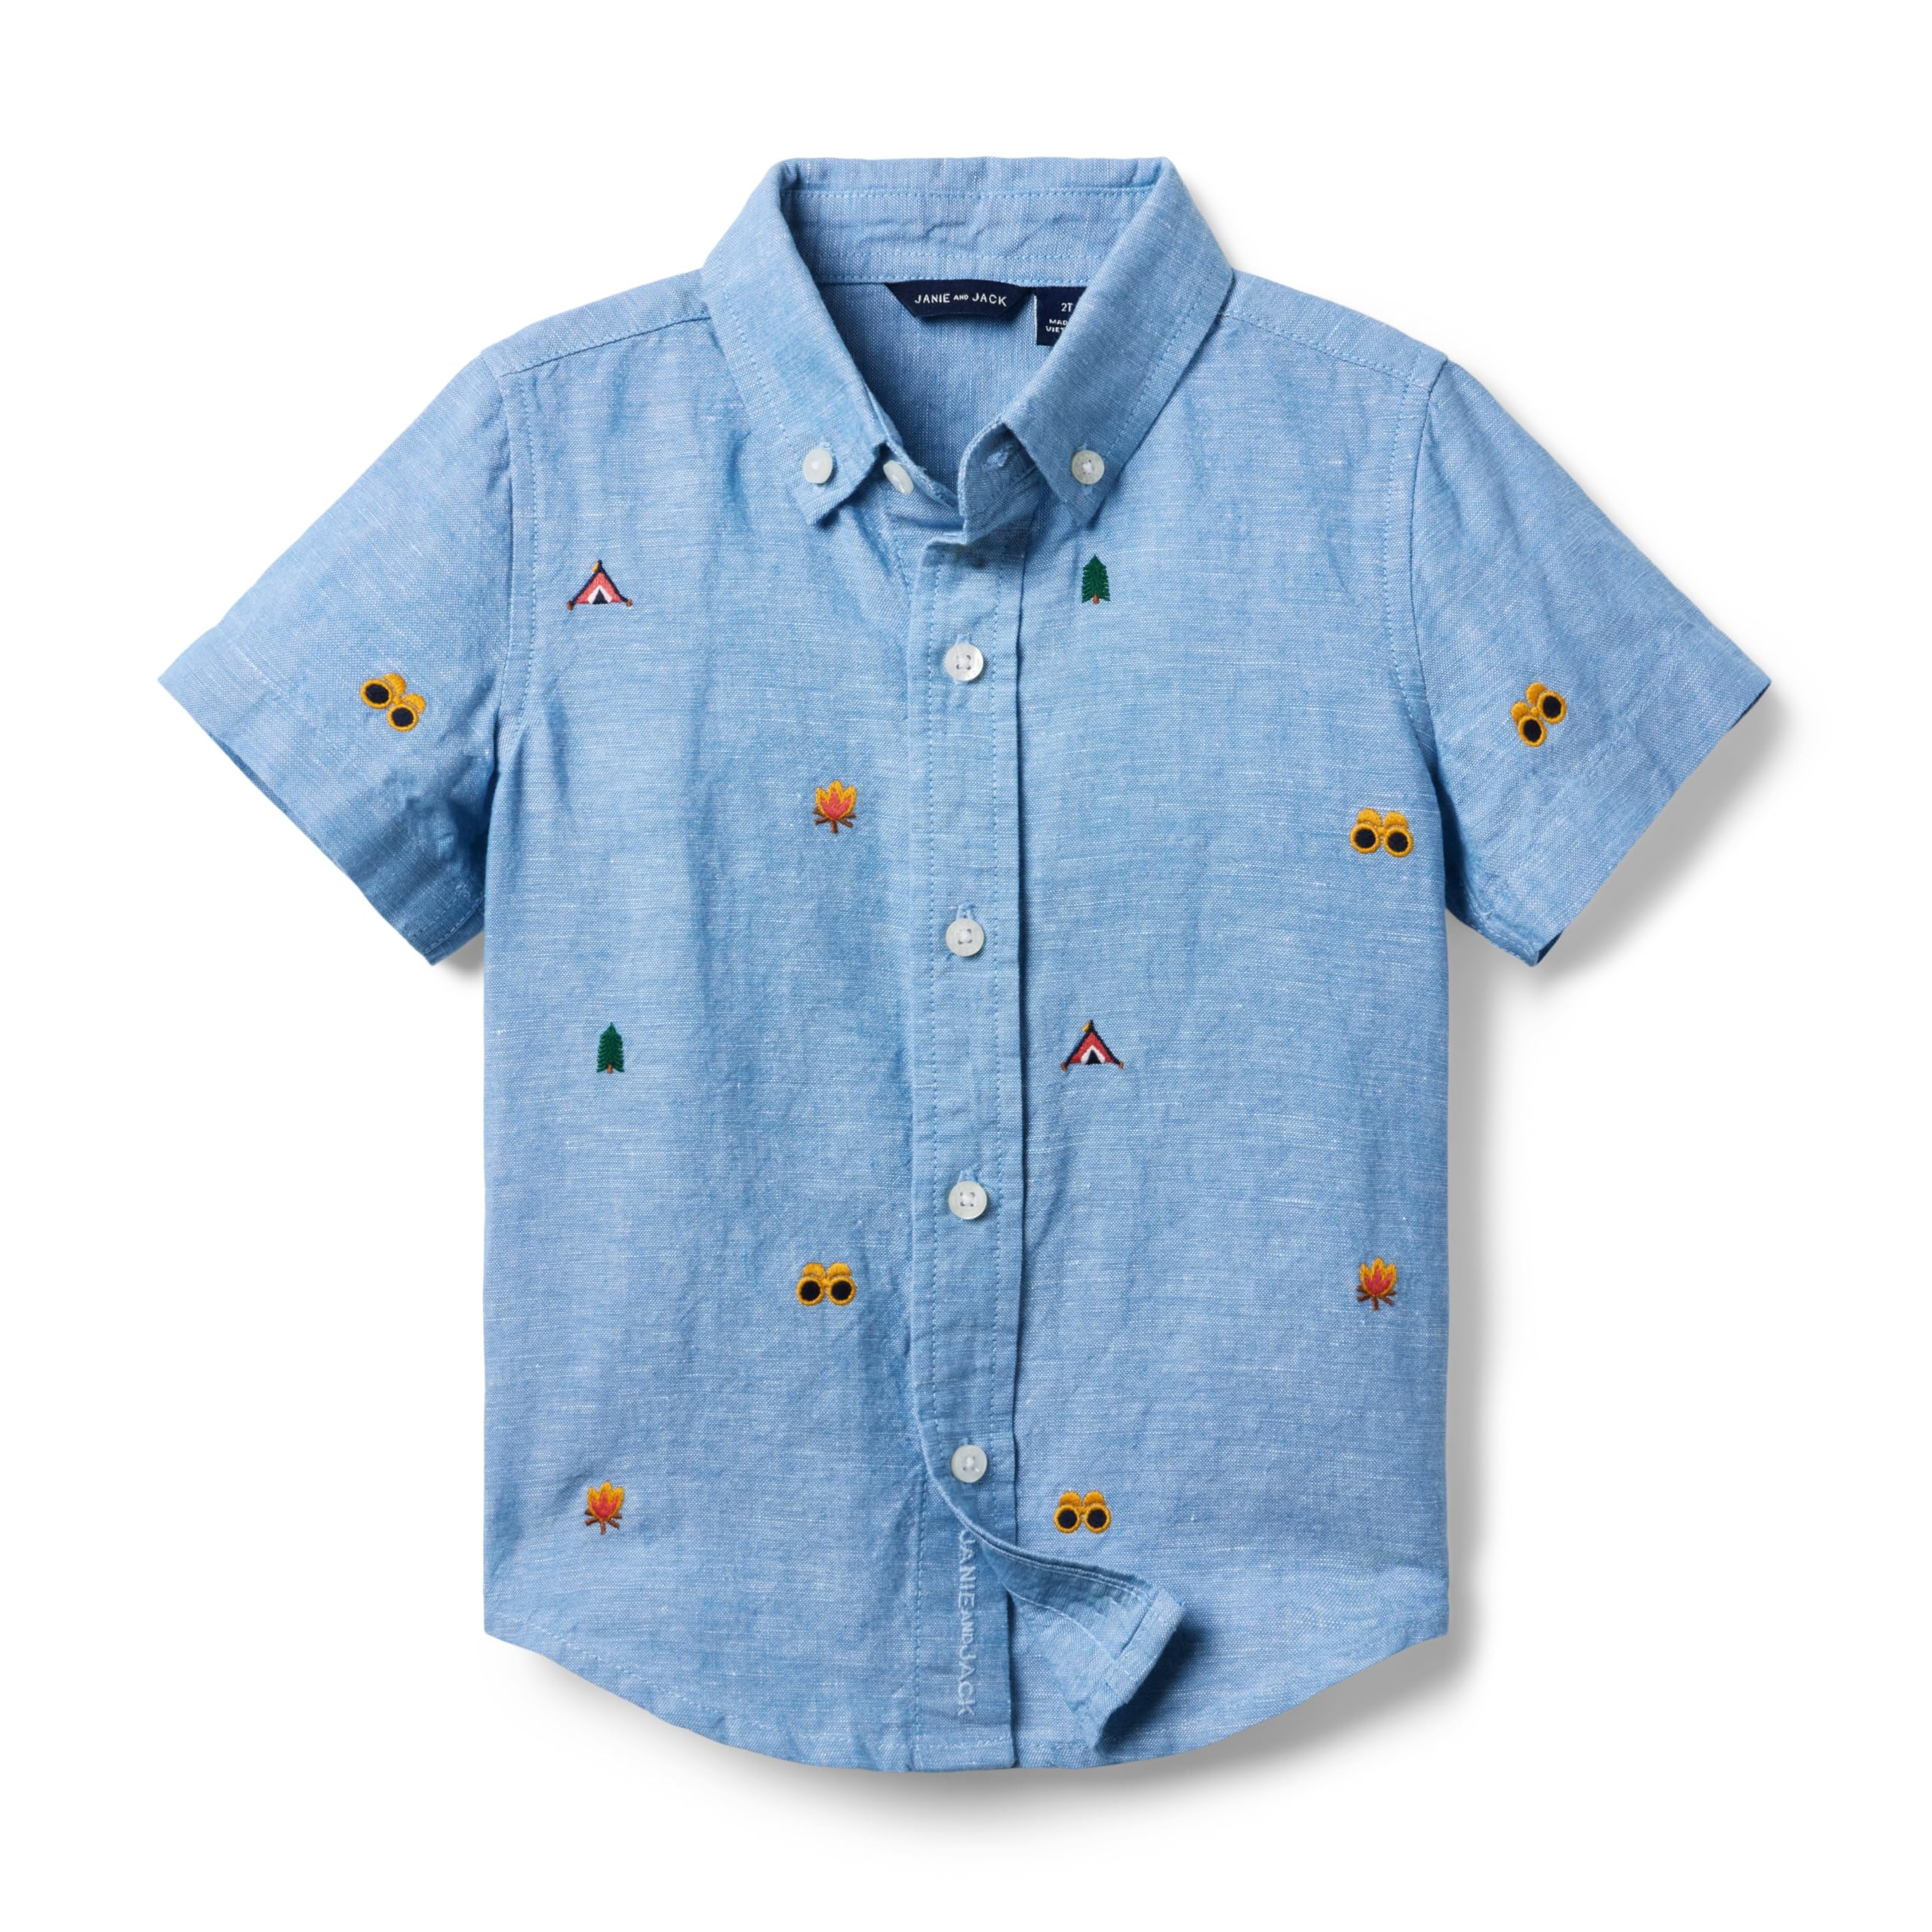 Boys Embroidered Linen Top (Toddler/Little Kid/Big Kid) Janie and Jack